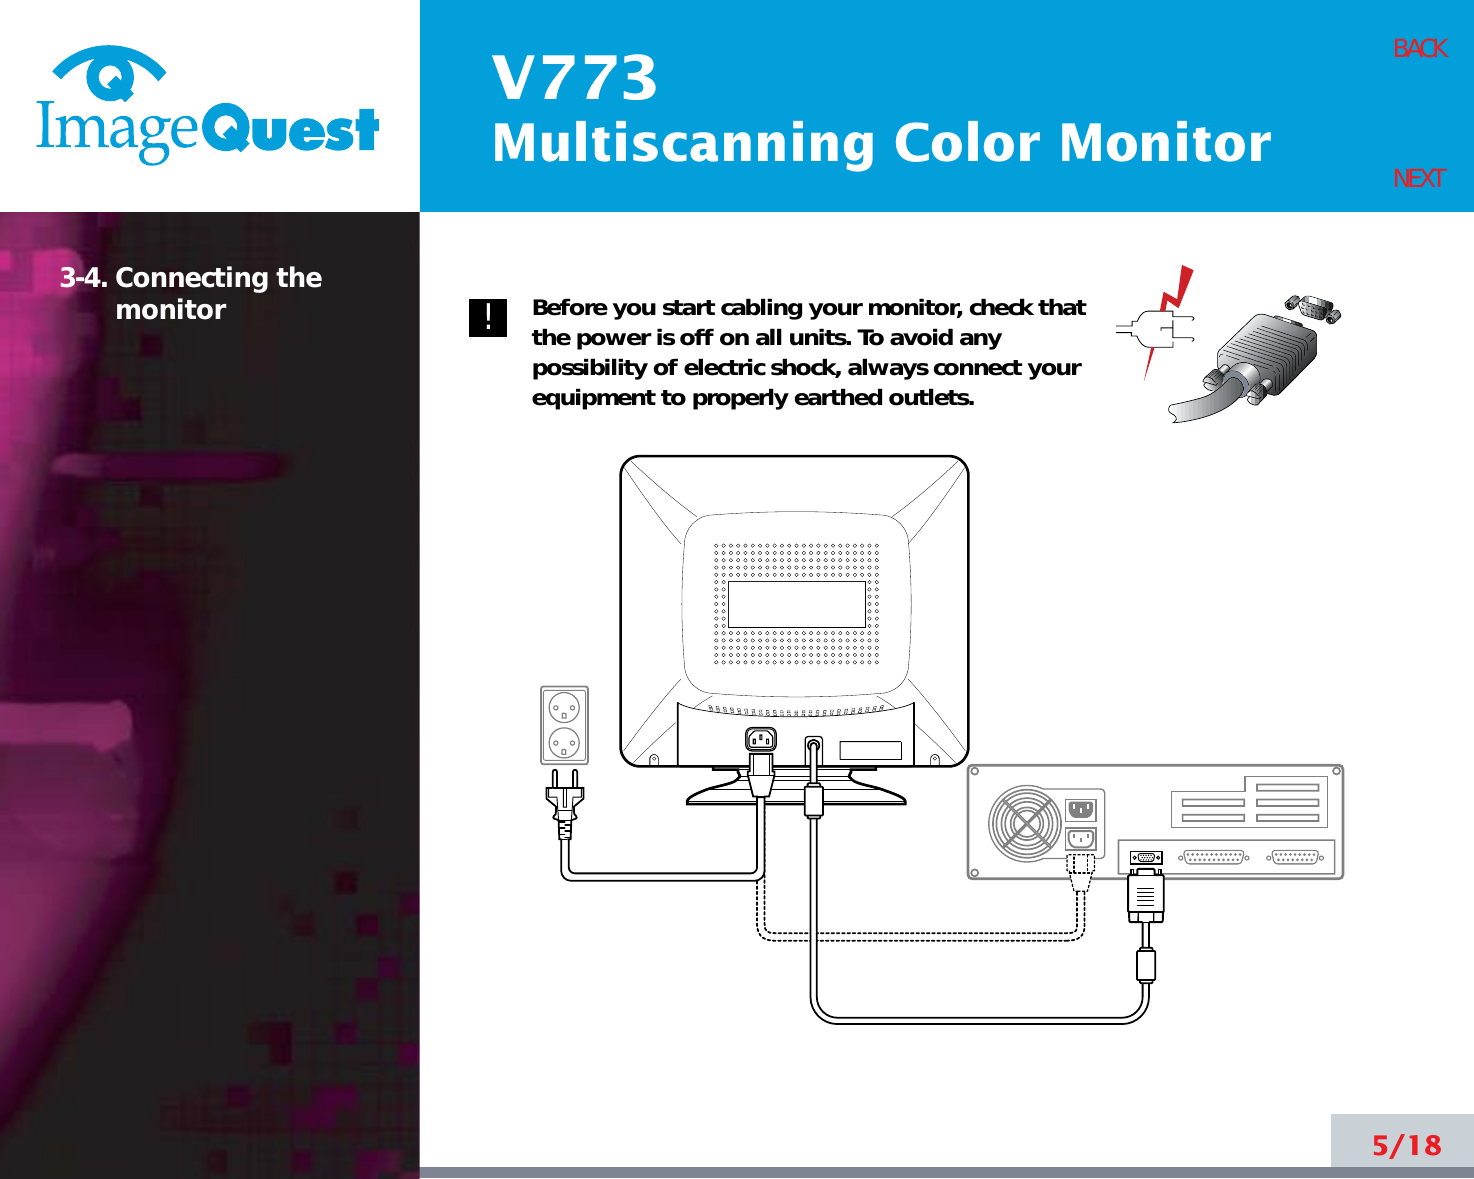 V773Multiscanning Color Monitor5/18BACKNEXT3-4. Connecting themonitor Before you start cabling your monitor, check thatthe power is off on all units. To avoid anypossibility of electric shock, always connect yourequipment to properly earthed outlets.!